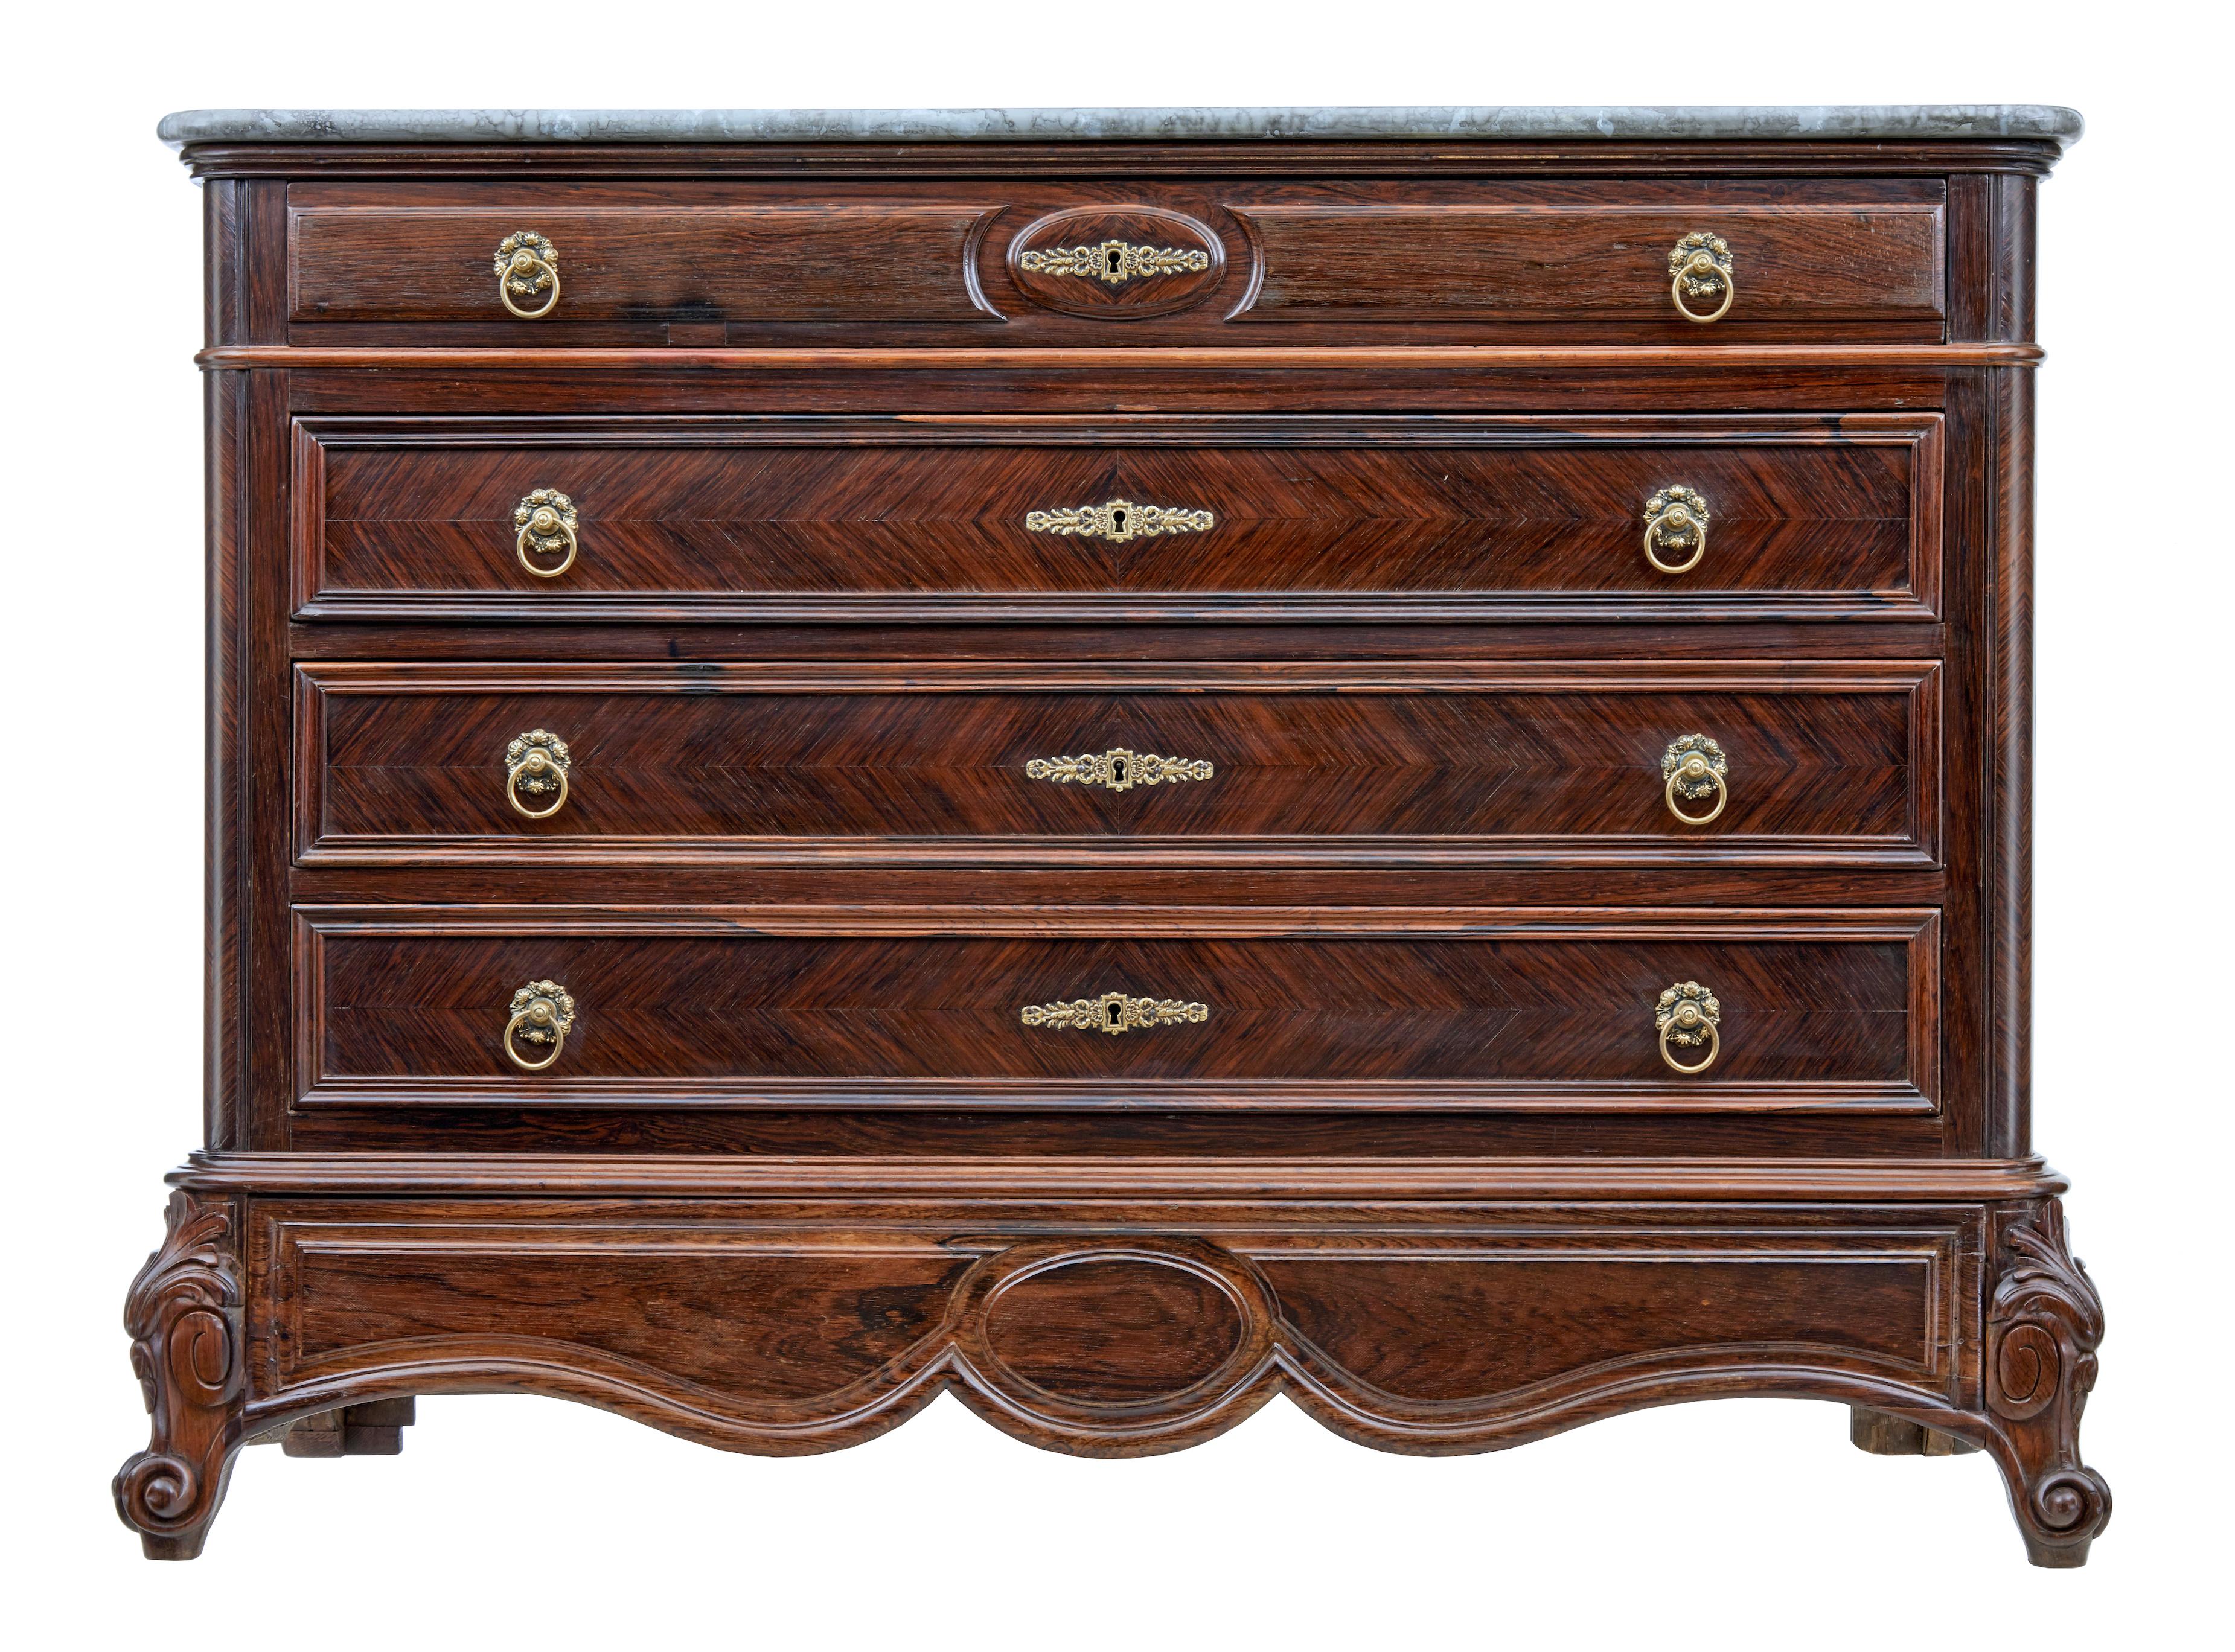 Large 19th century French palisander chest of drawers circa 1860.

Stunning french commode of grand proportions beautifully veneered in palisander from the rosewood family.

Fitted with 4 drawer's of equal proportions, decorated with beaded